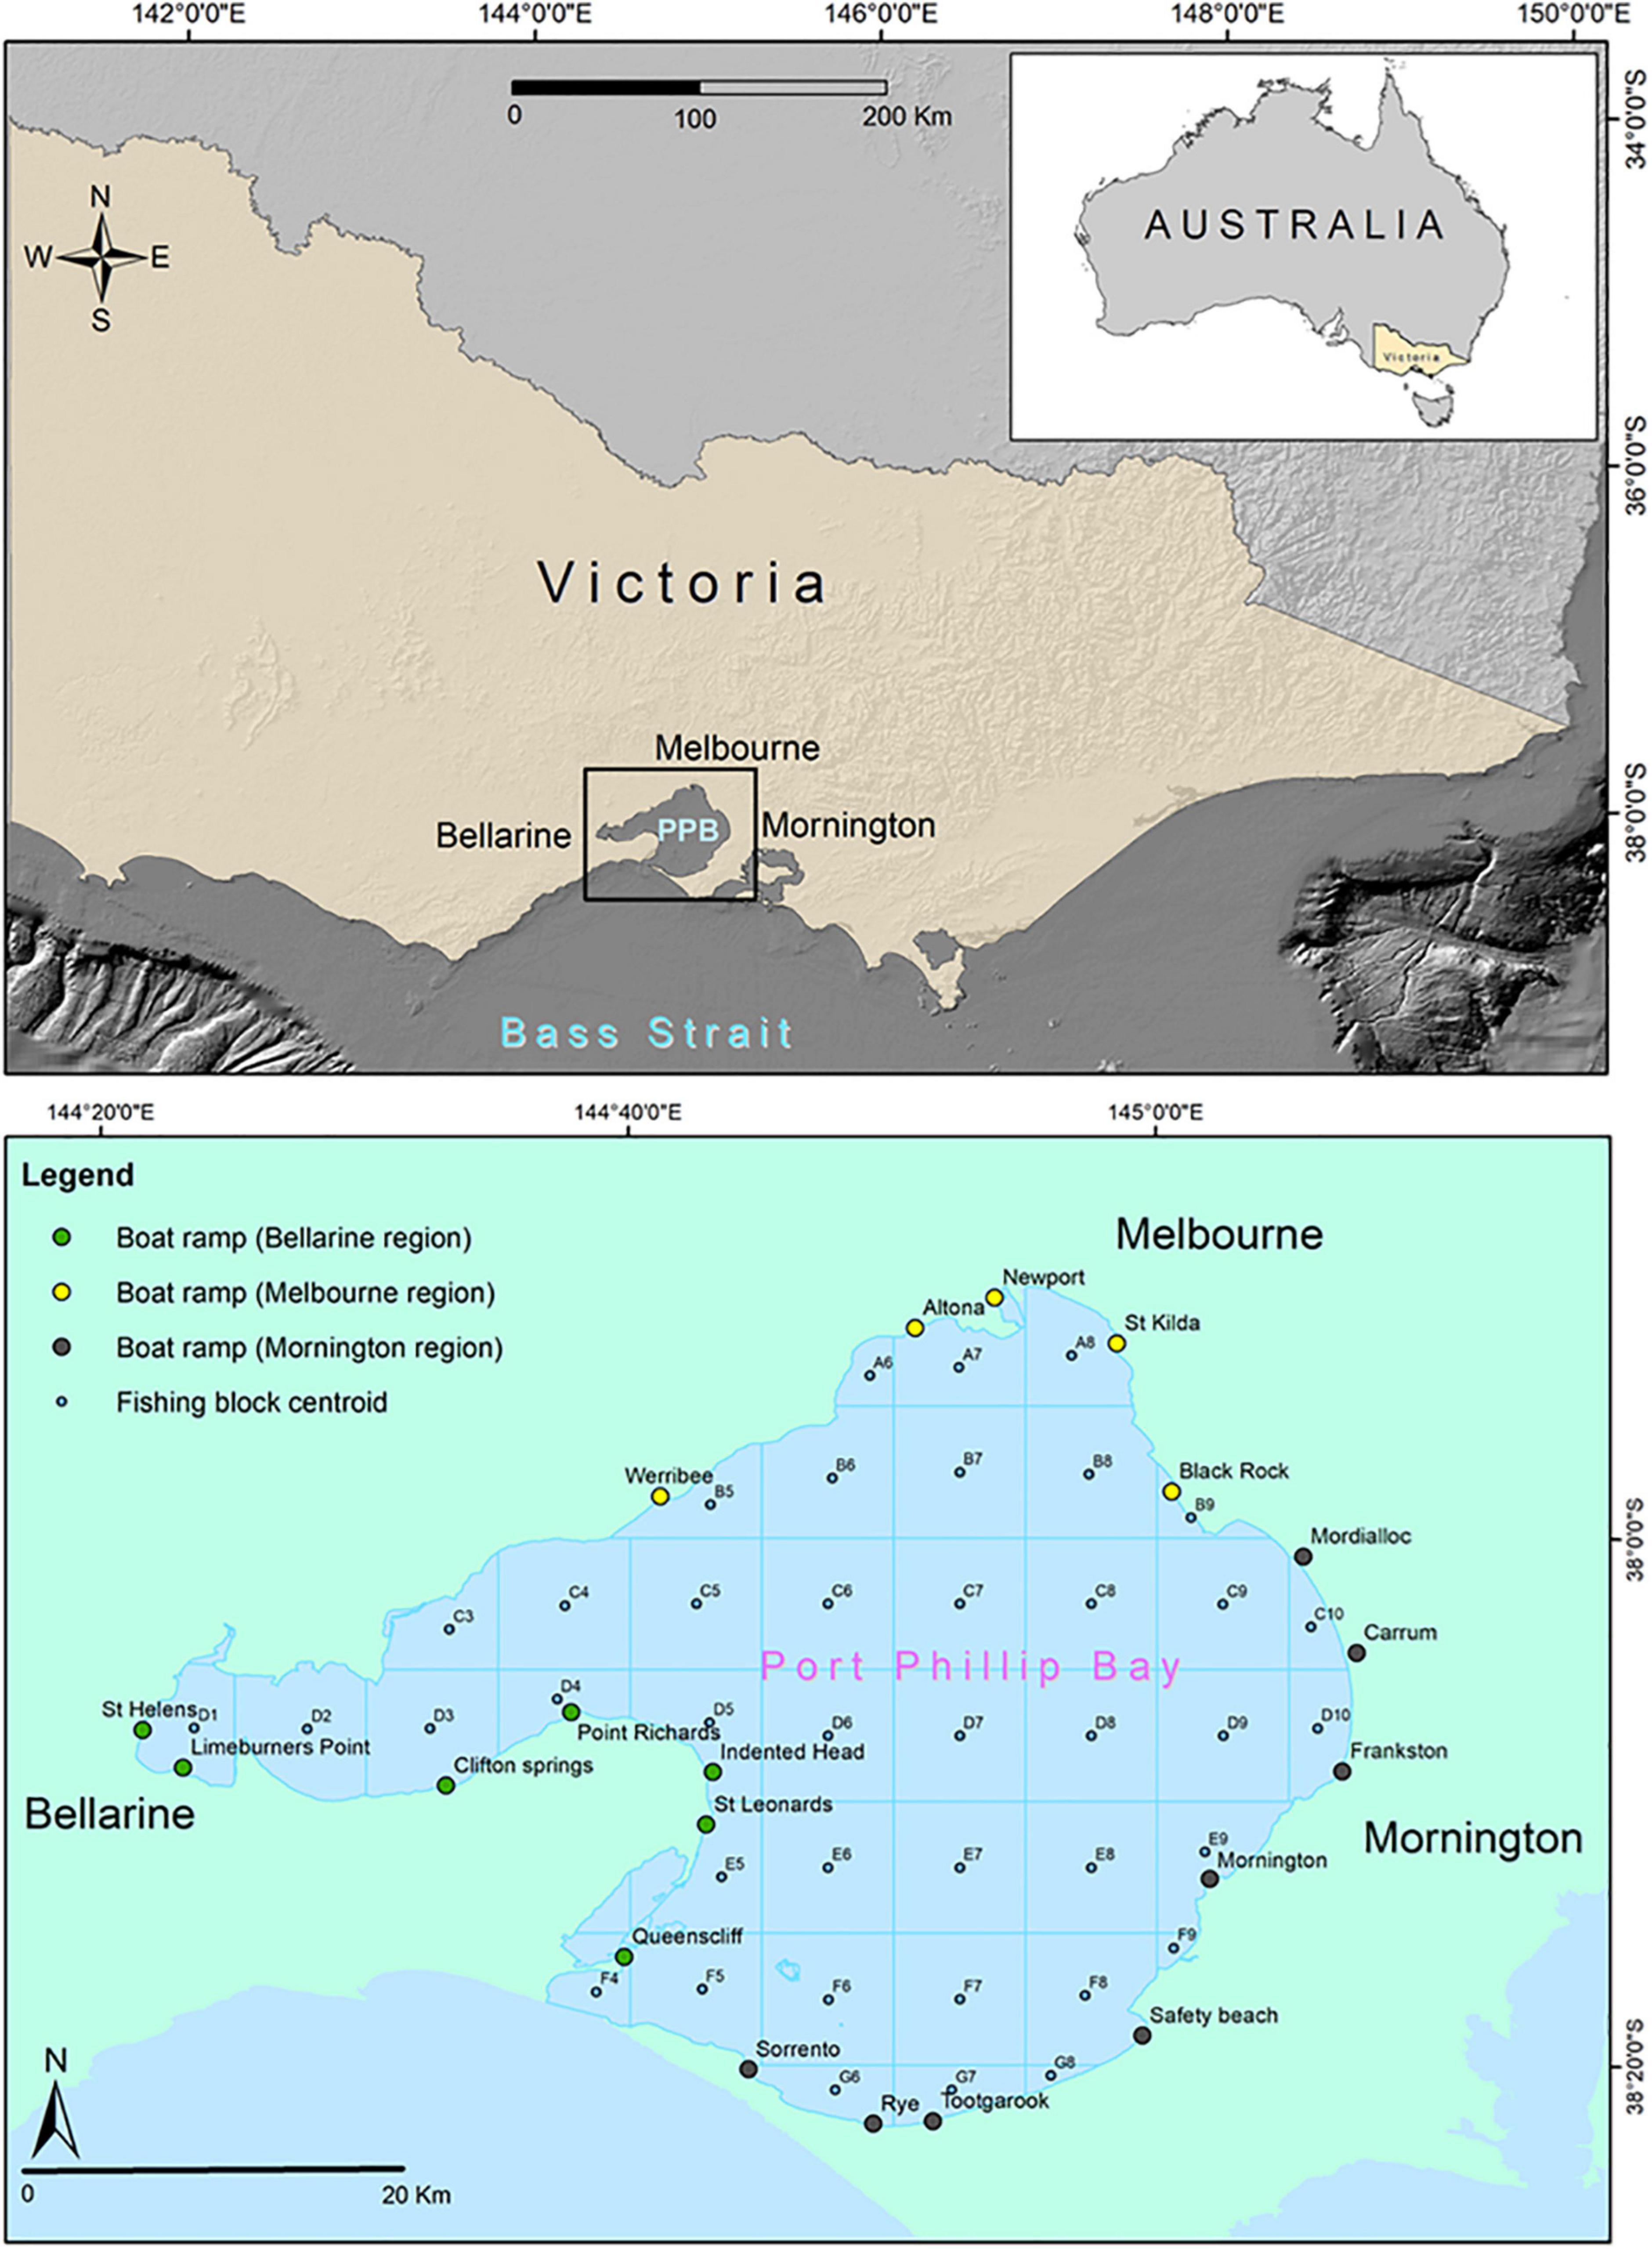 Frontiers  Angling to Reach a Destination to Fish—Exploring the Land and  Water Travel Dynamics of Recreational Fishers in Port Phillip Bay, Australia